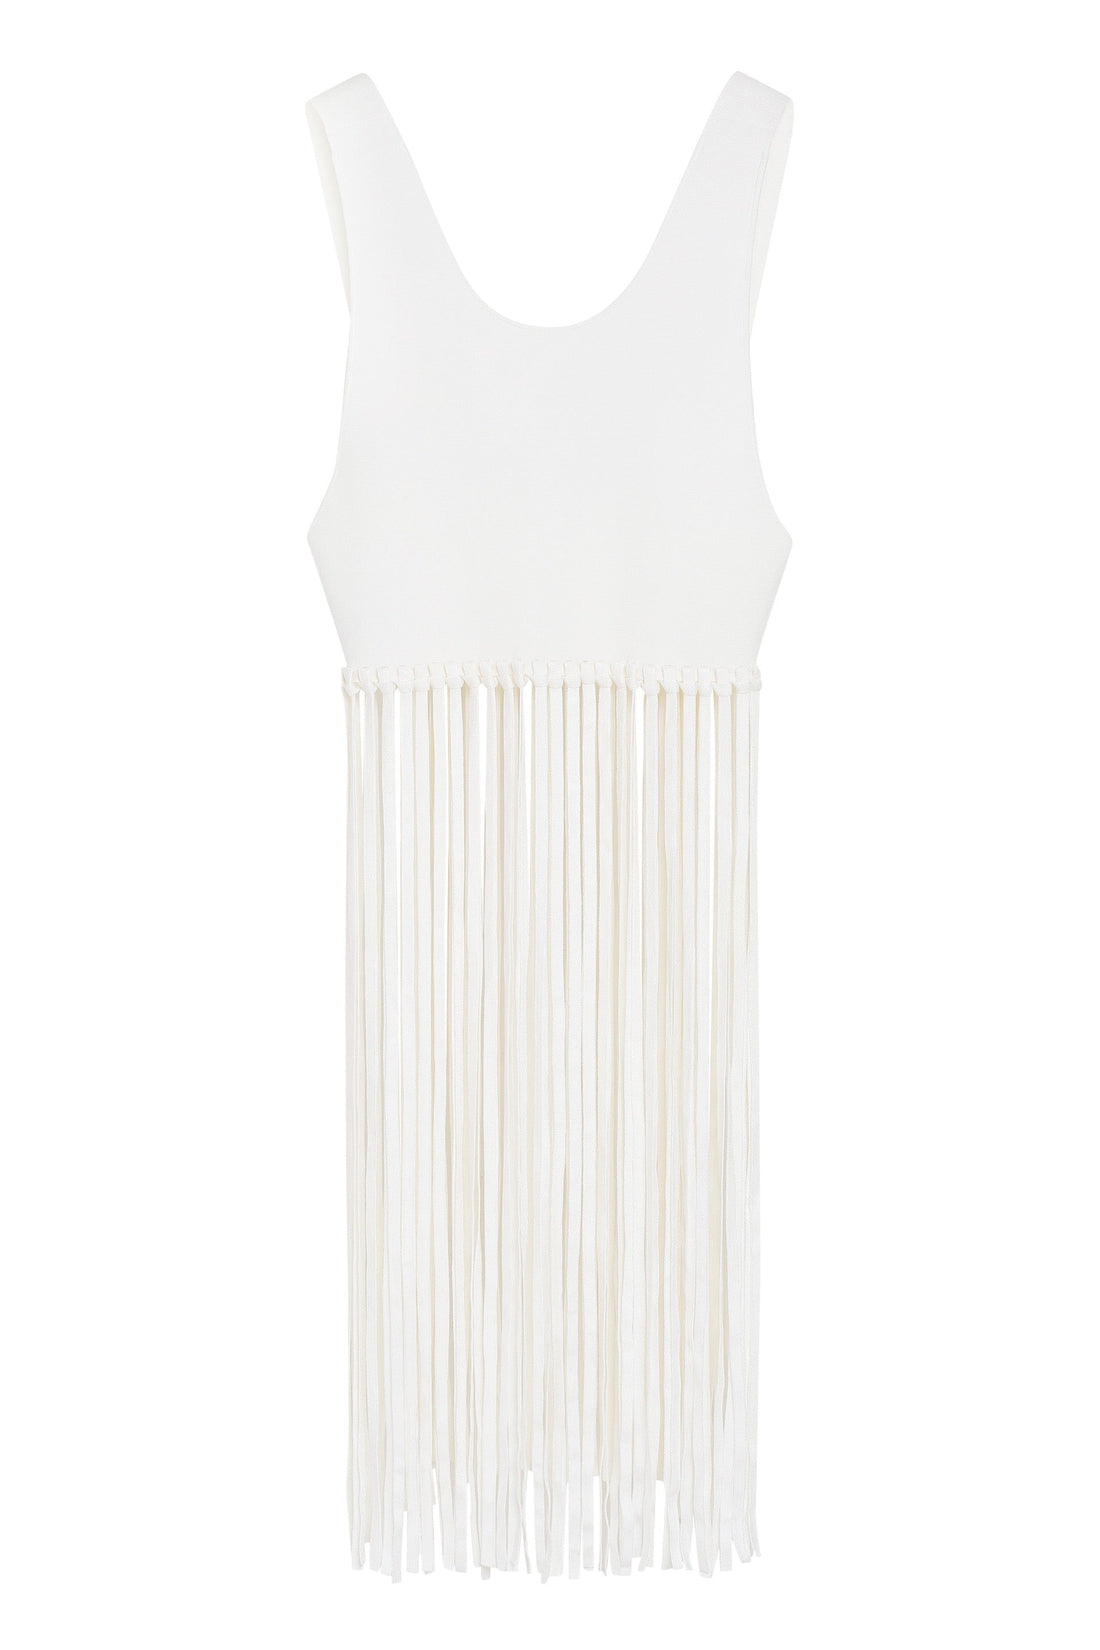 Philosophy di Lorenzo Serafini-OUTLET-SALE-Top with fringes-ARCHIVIST